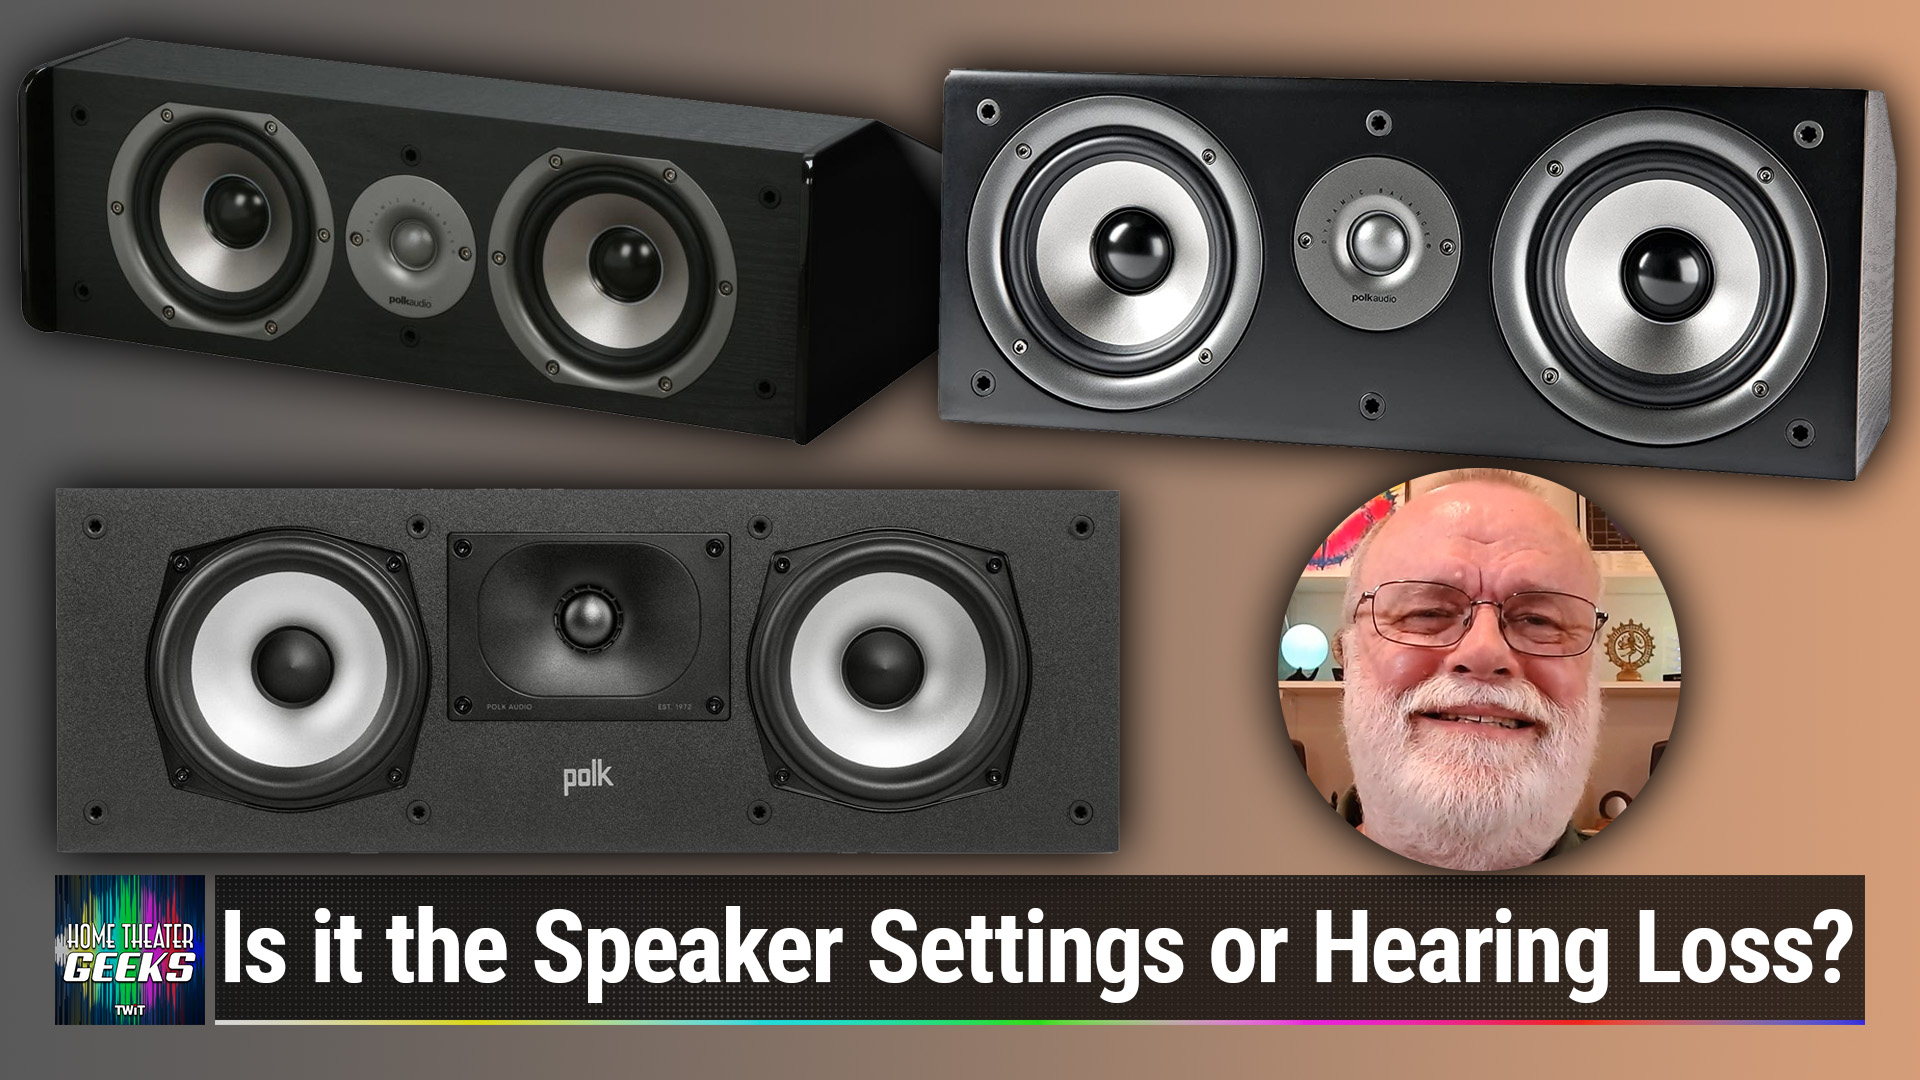 Improving Center Speaker Sound & Dealing With Hearing Loss (Home Theater Geeks #429)